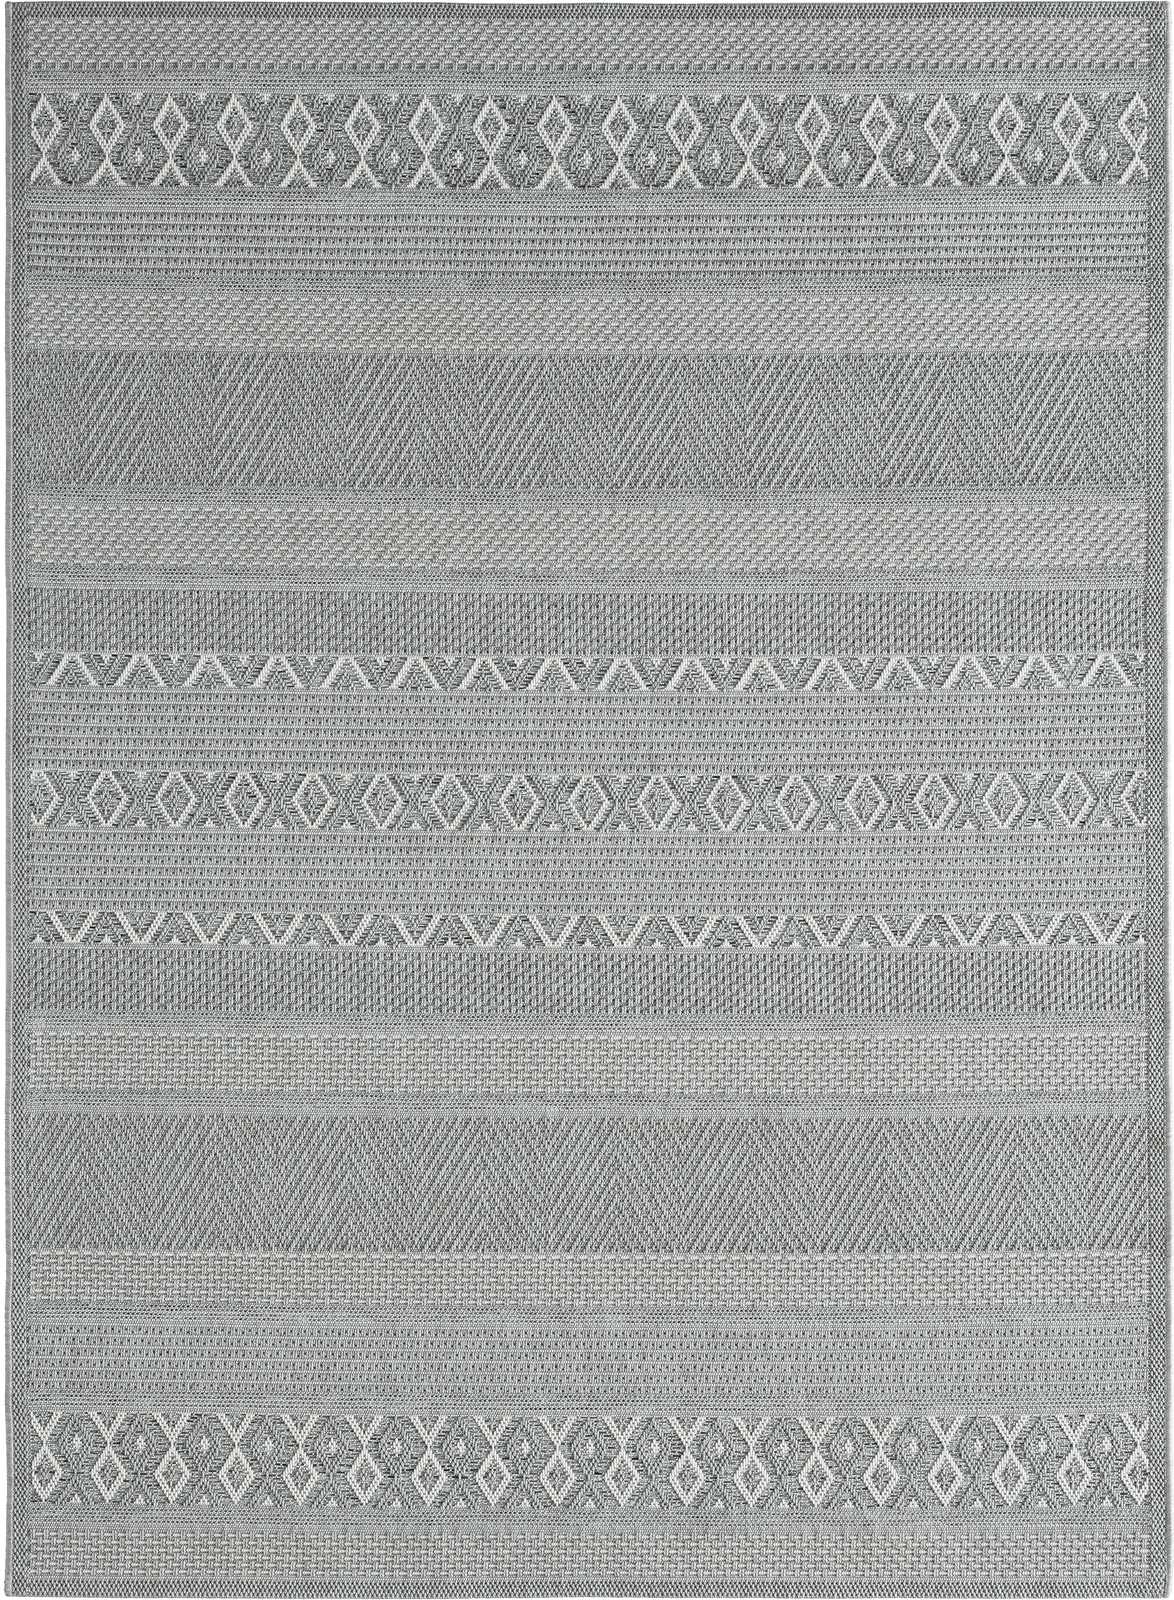             Simple Patterned Outdoor Rug in Grey - 220 x 160 cm
        